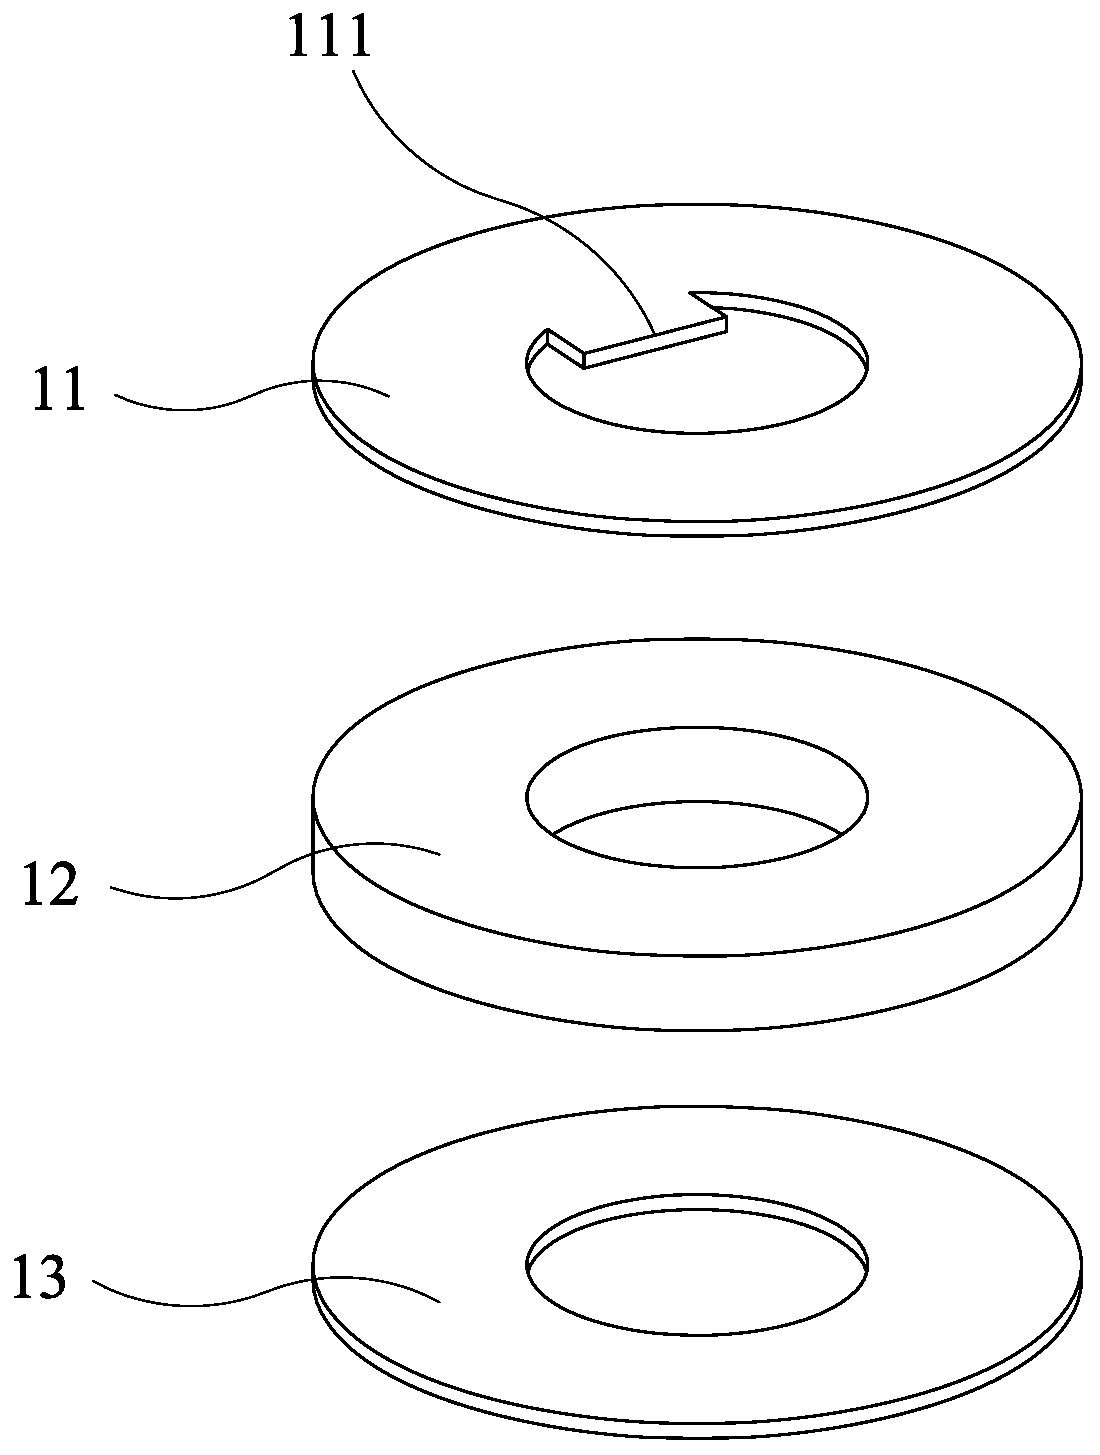 Annular double-sided adhesive tape and equipment and technology for producing annular double-sided adhesive tape